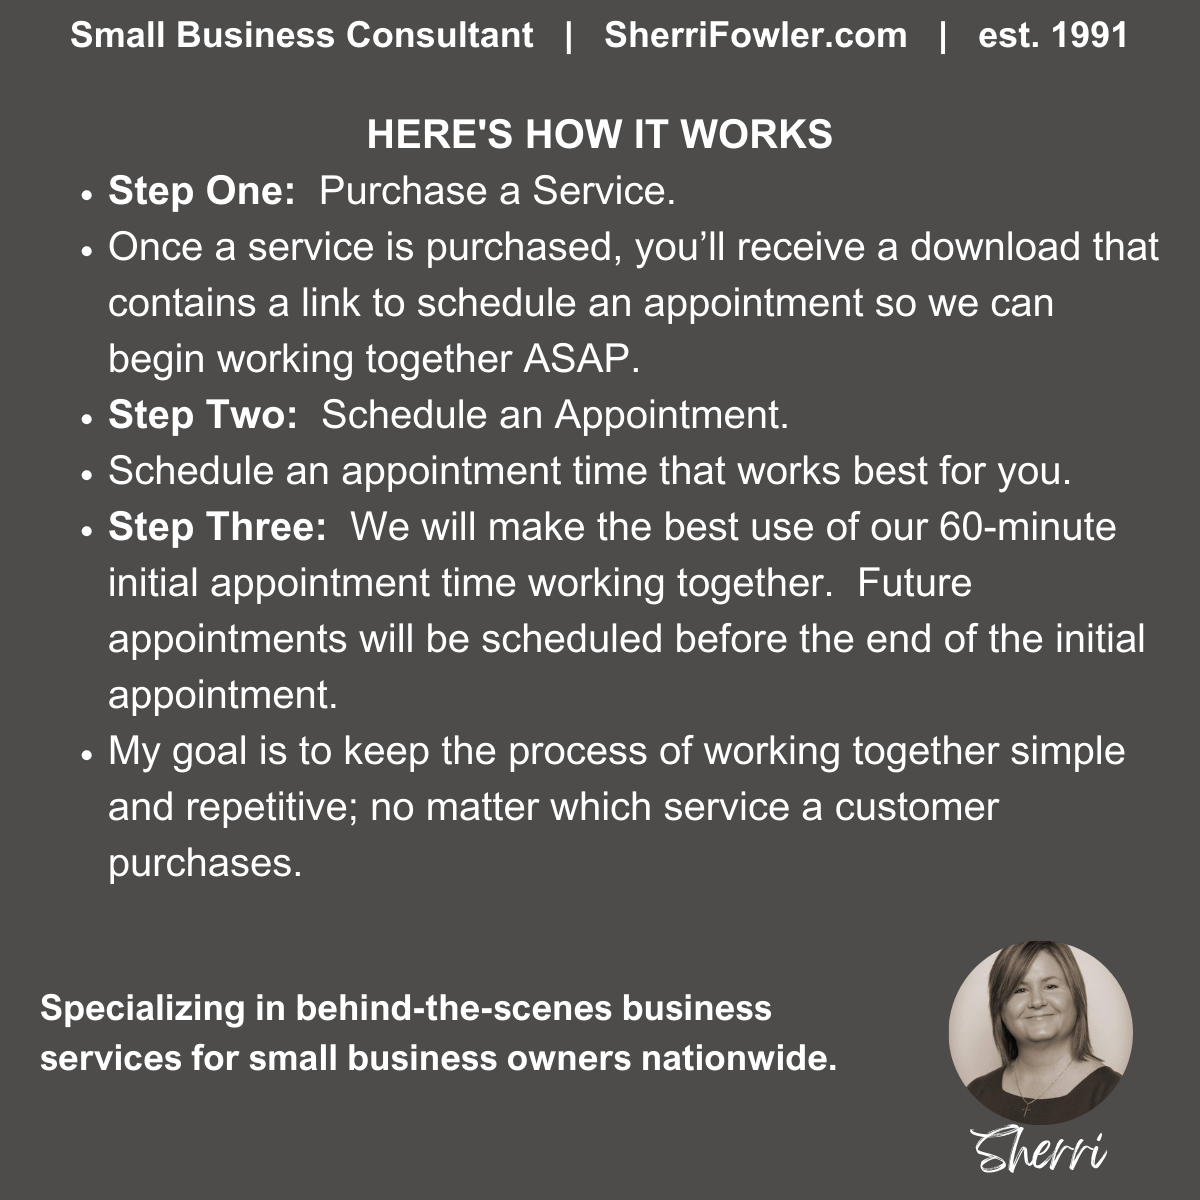 Sherri Smith creates business forms specific to each client's needs. Small business services can be purchased at sherrifowler.com #sherrifowler #smallbusinessservices #businesstobusinessservices #sherrismith